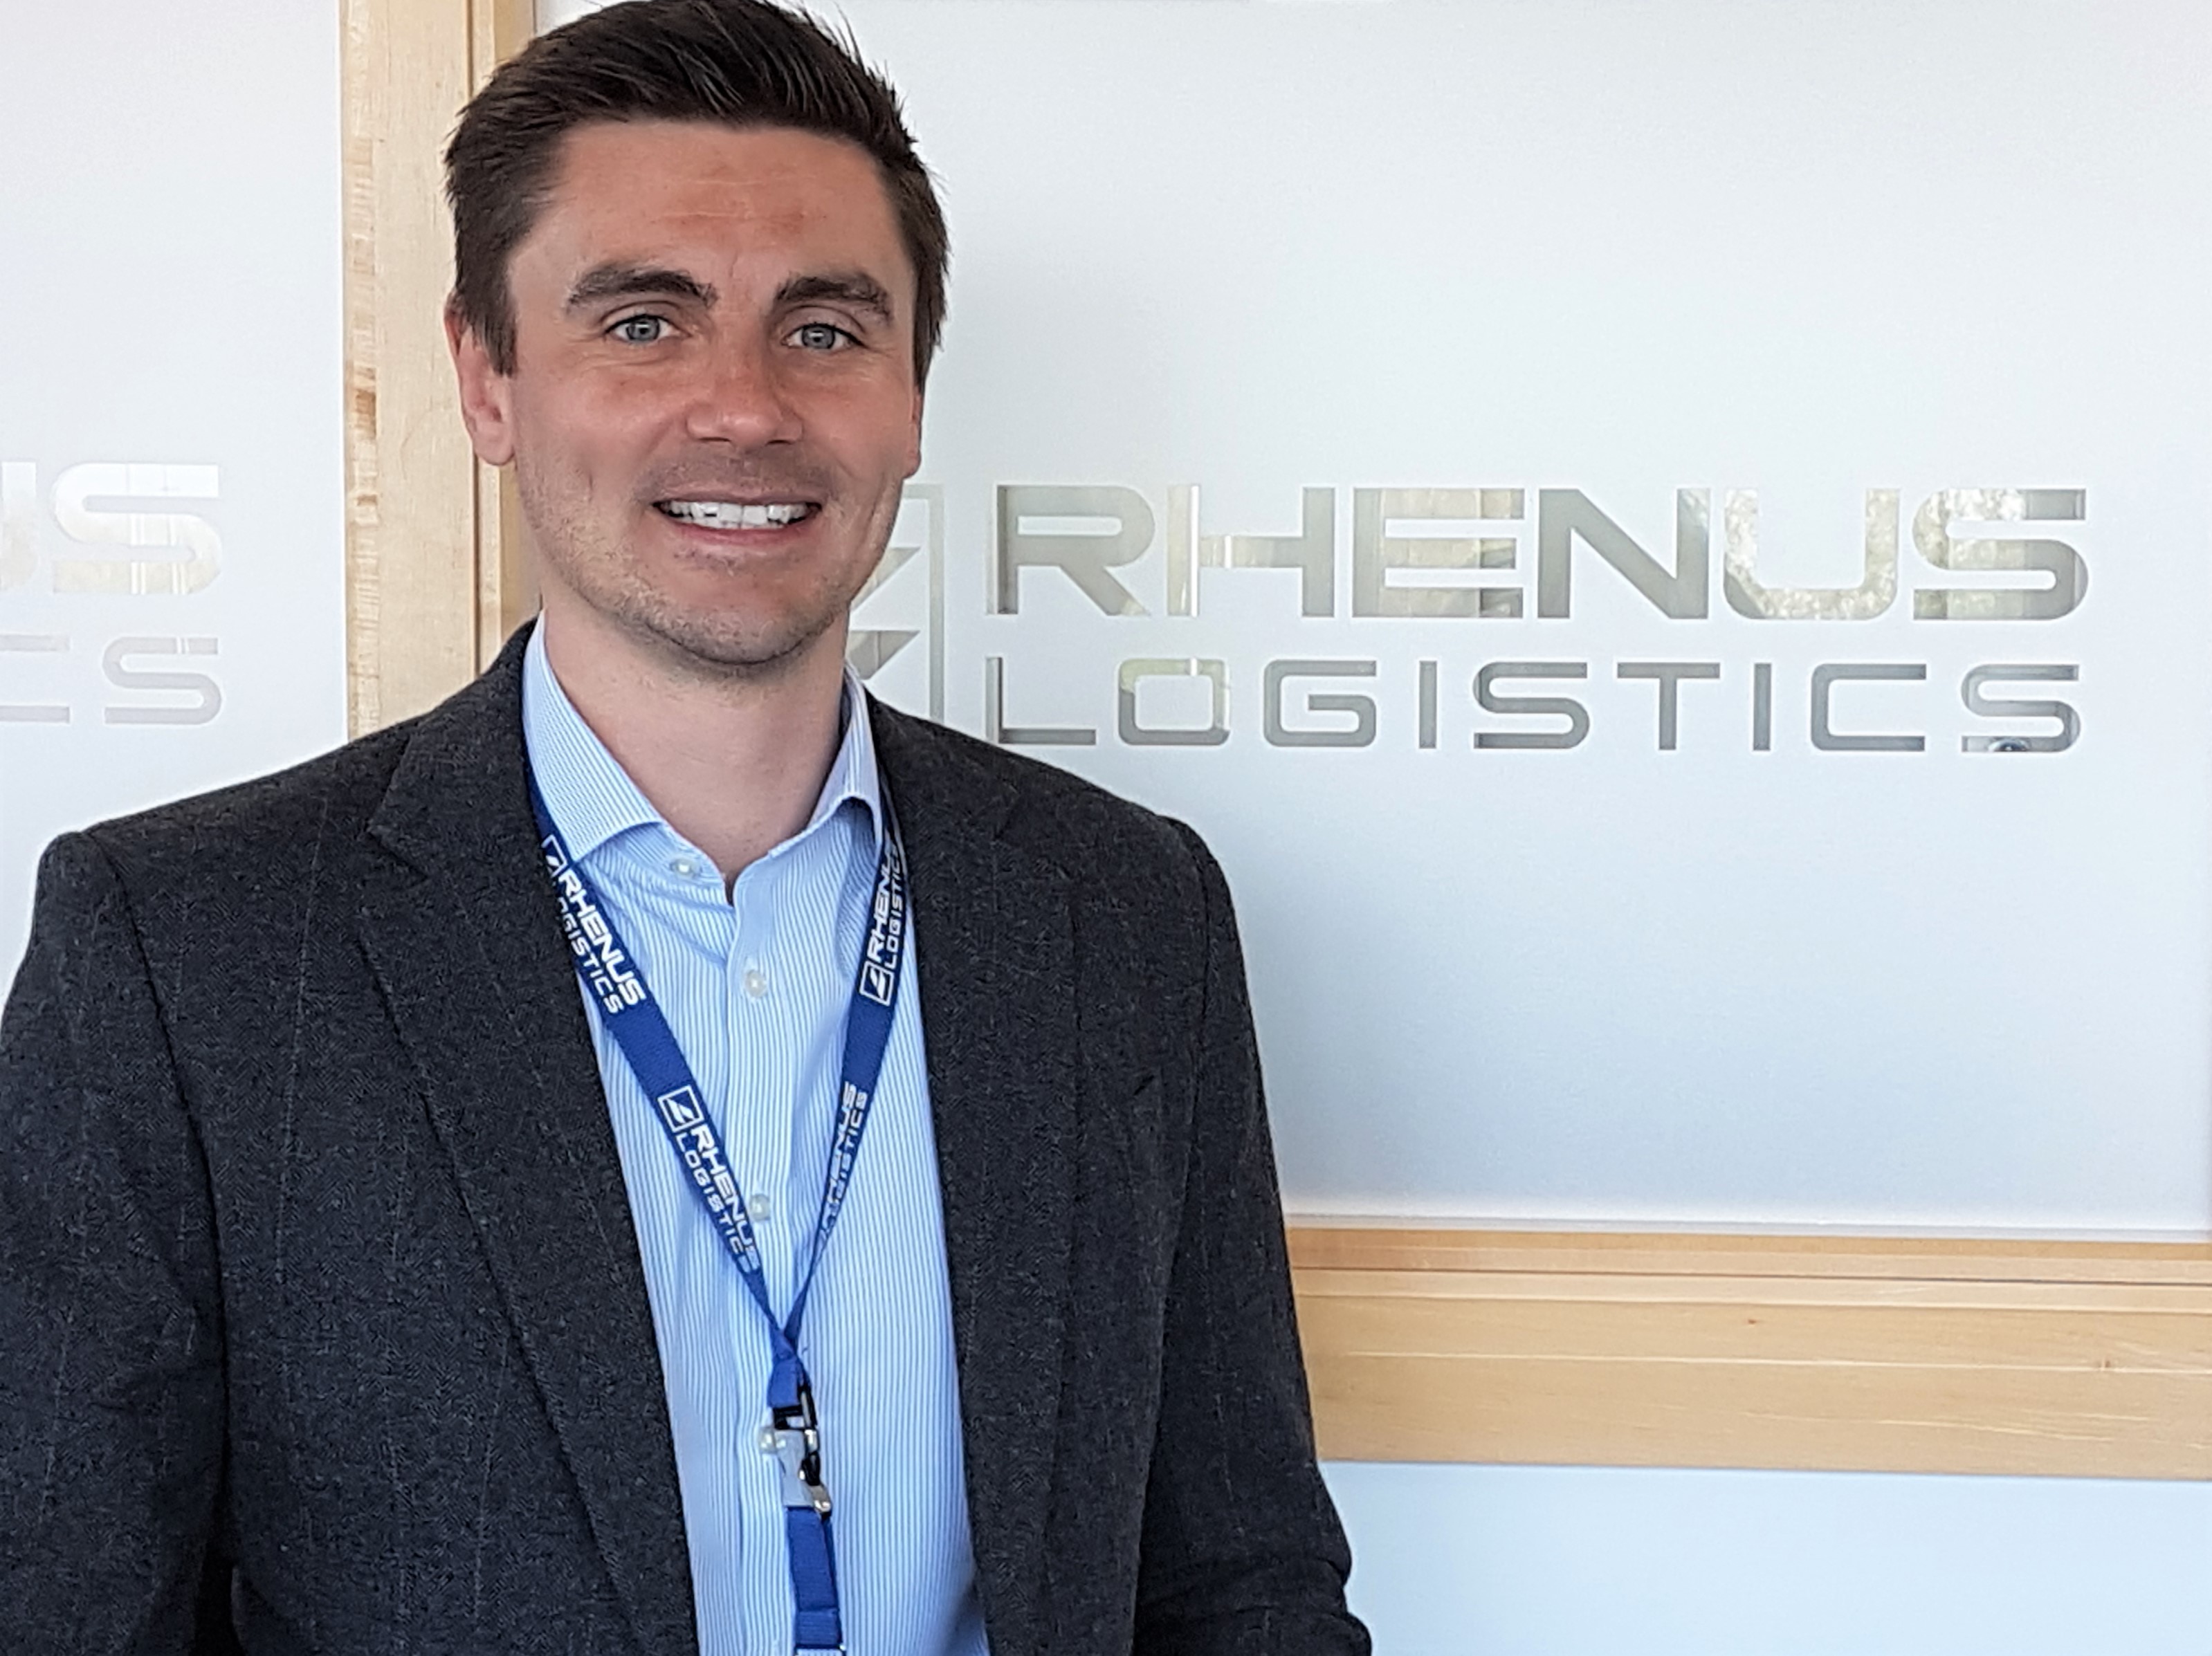 Rhenus appoints new European Sector Manager